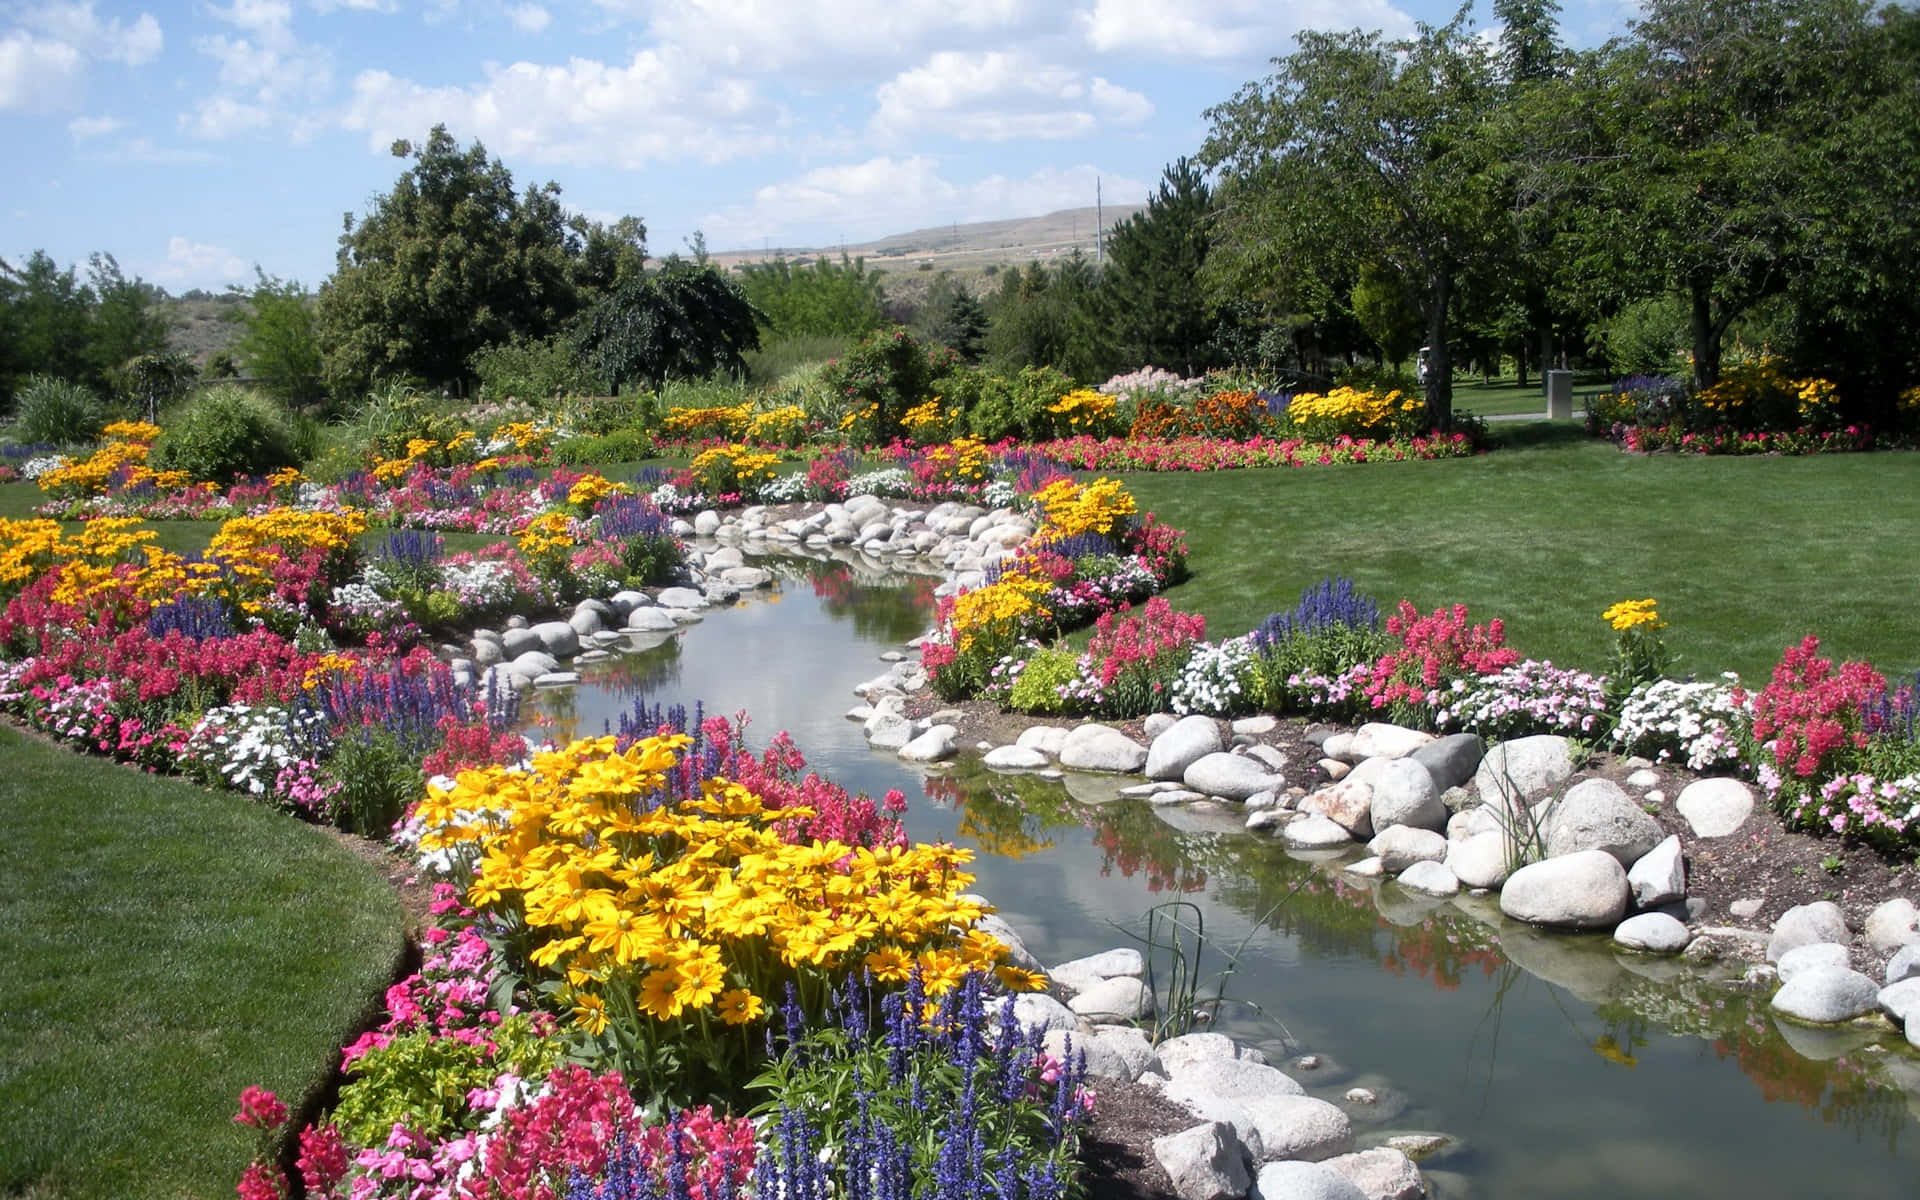 A Garden With A Stream And Colorful Flowers